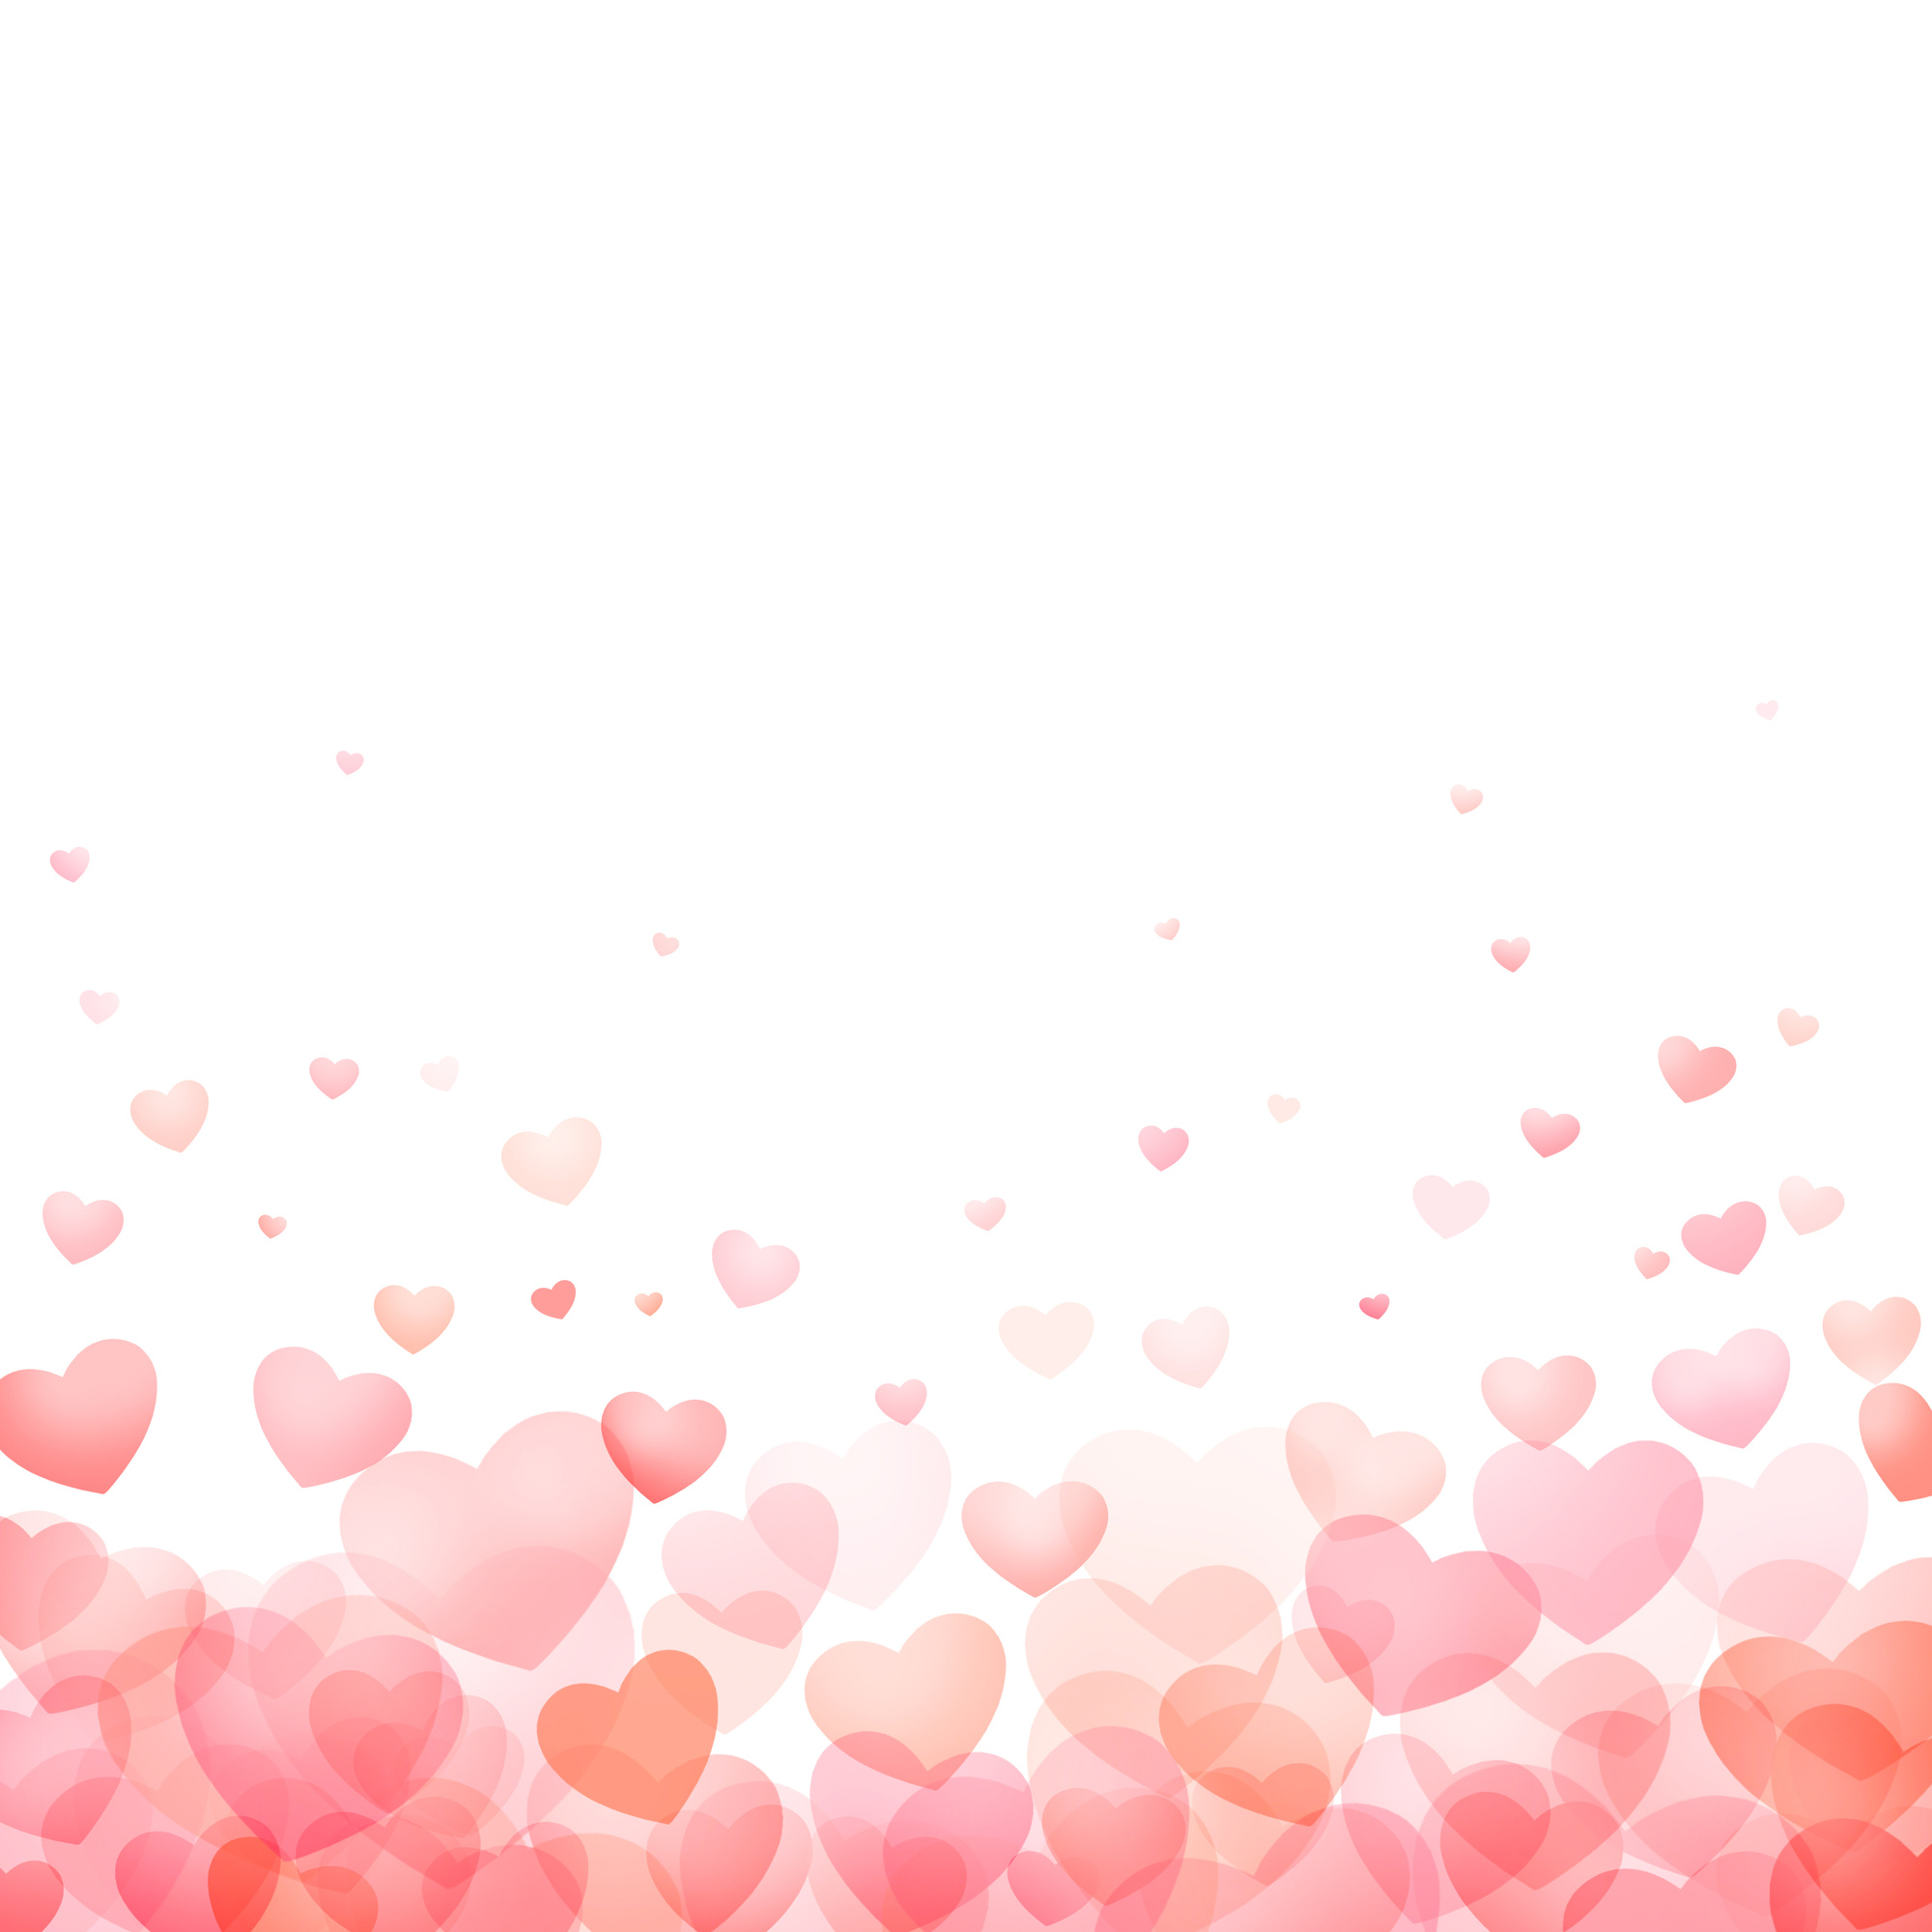 Scattered Hearts Background